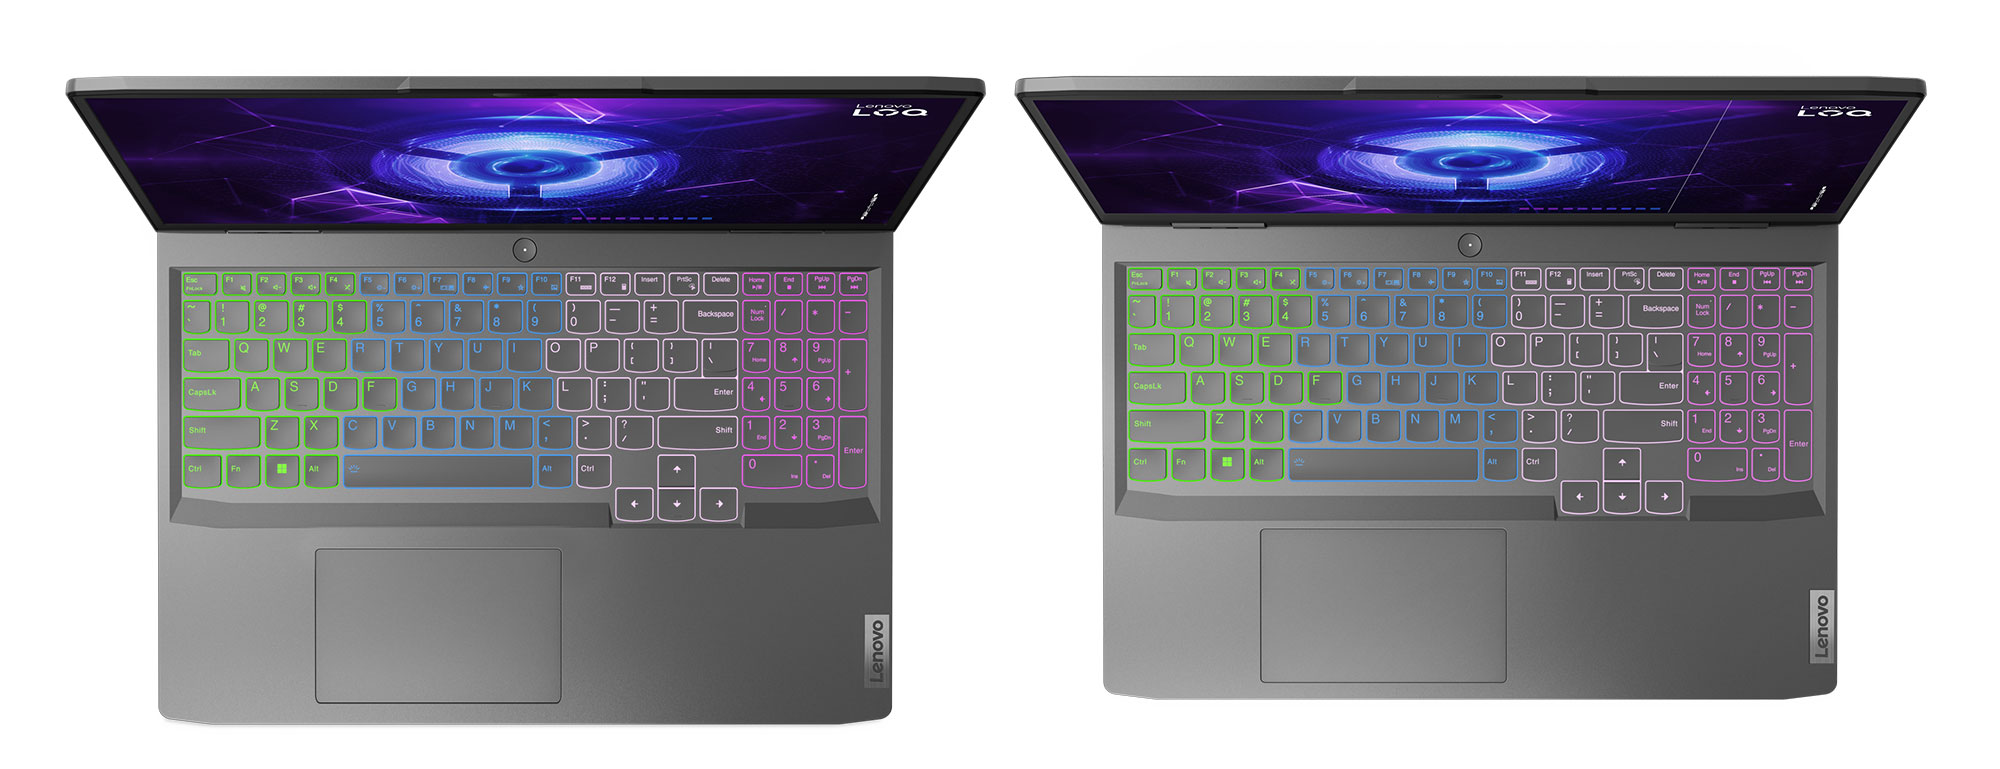 Lenovo LOQ 16 (left) and Low 15 (right) - keyboard and main decks